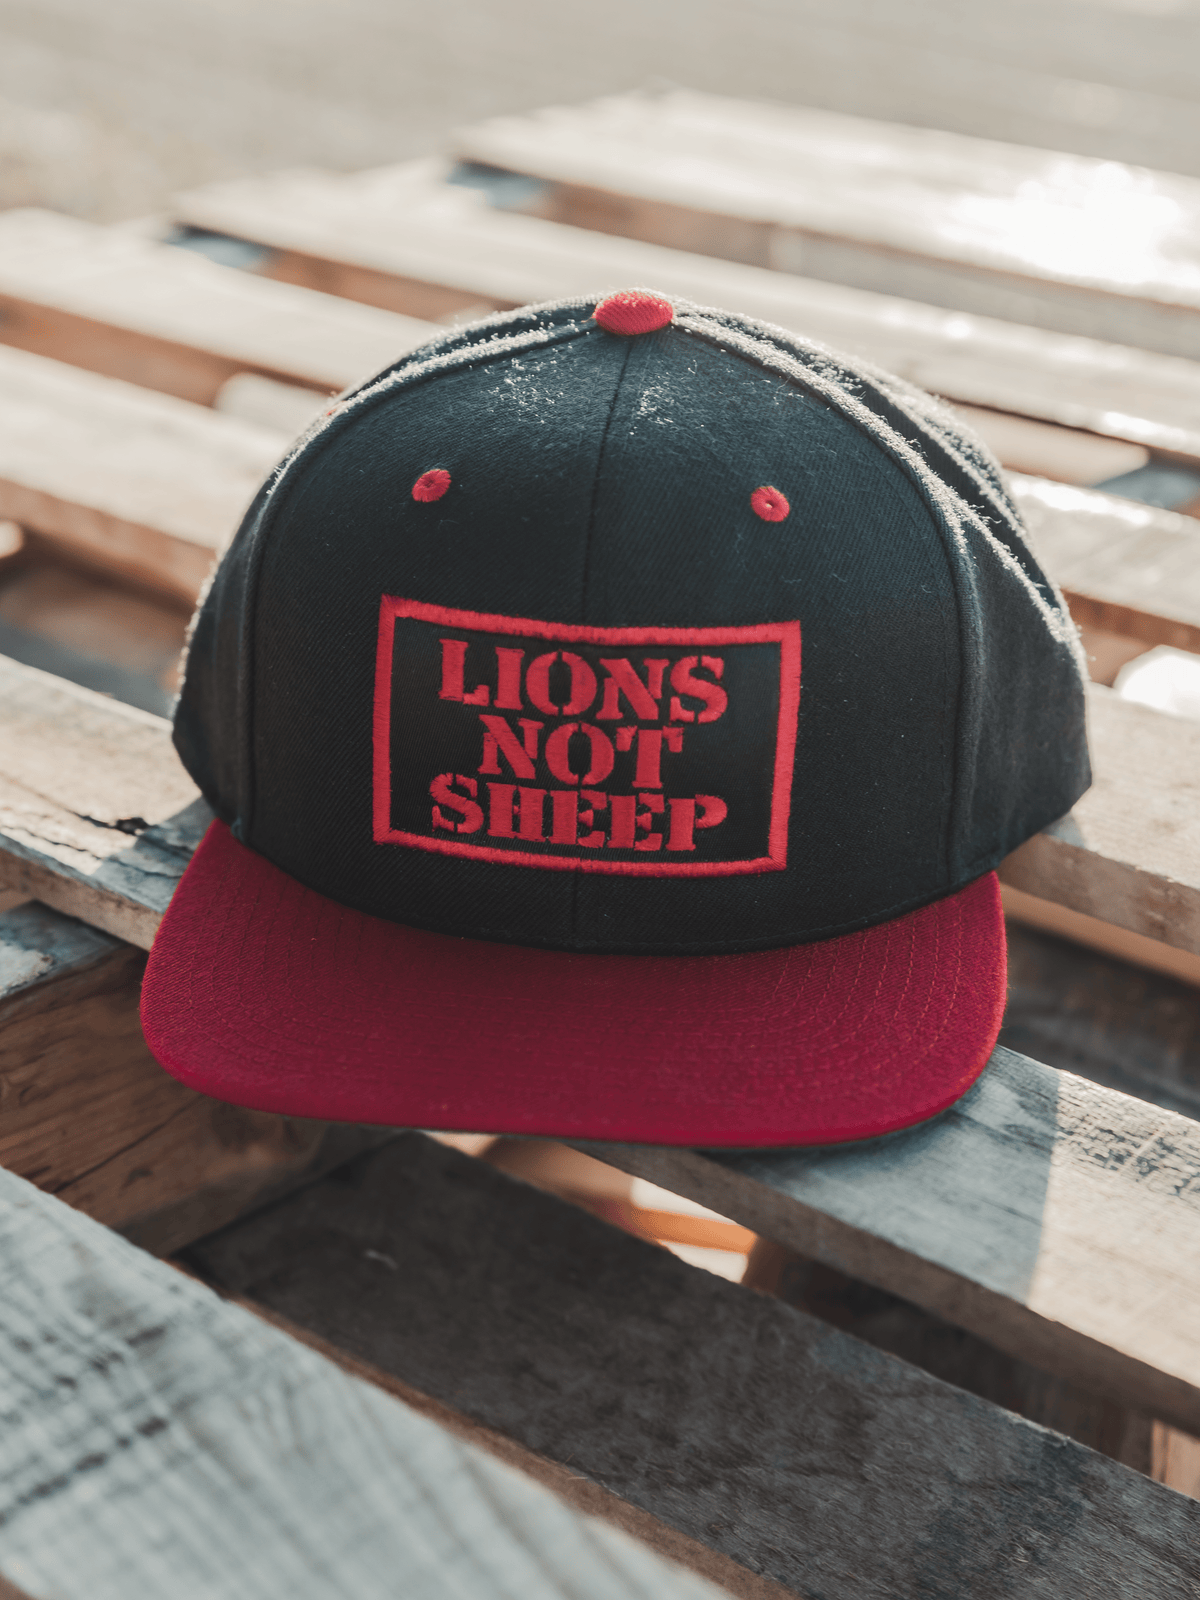 Lions Not Sheep OG Hat (Red/Black Fabric Back) - Lions Not Sheep ®